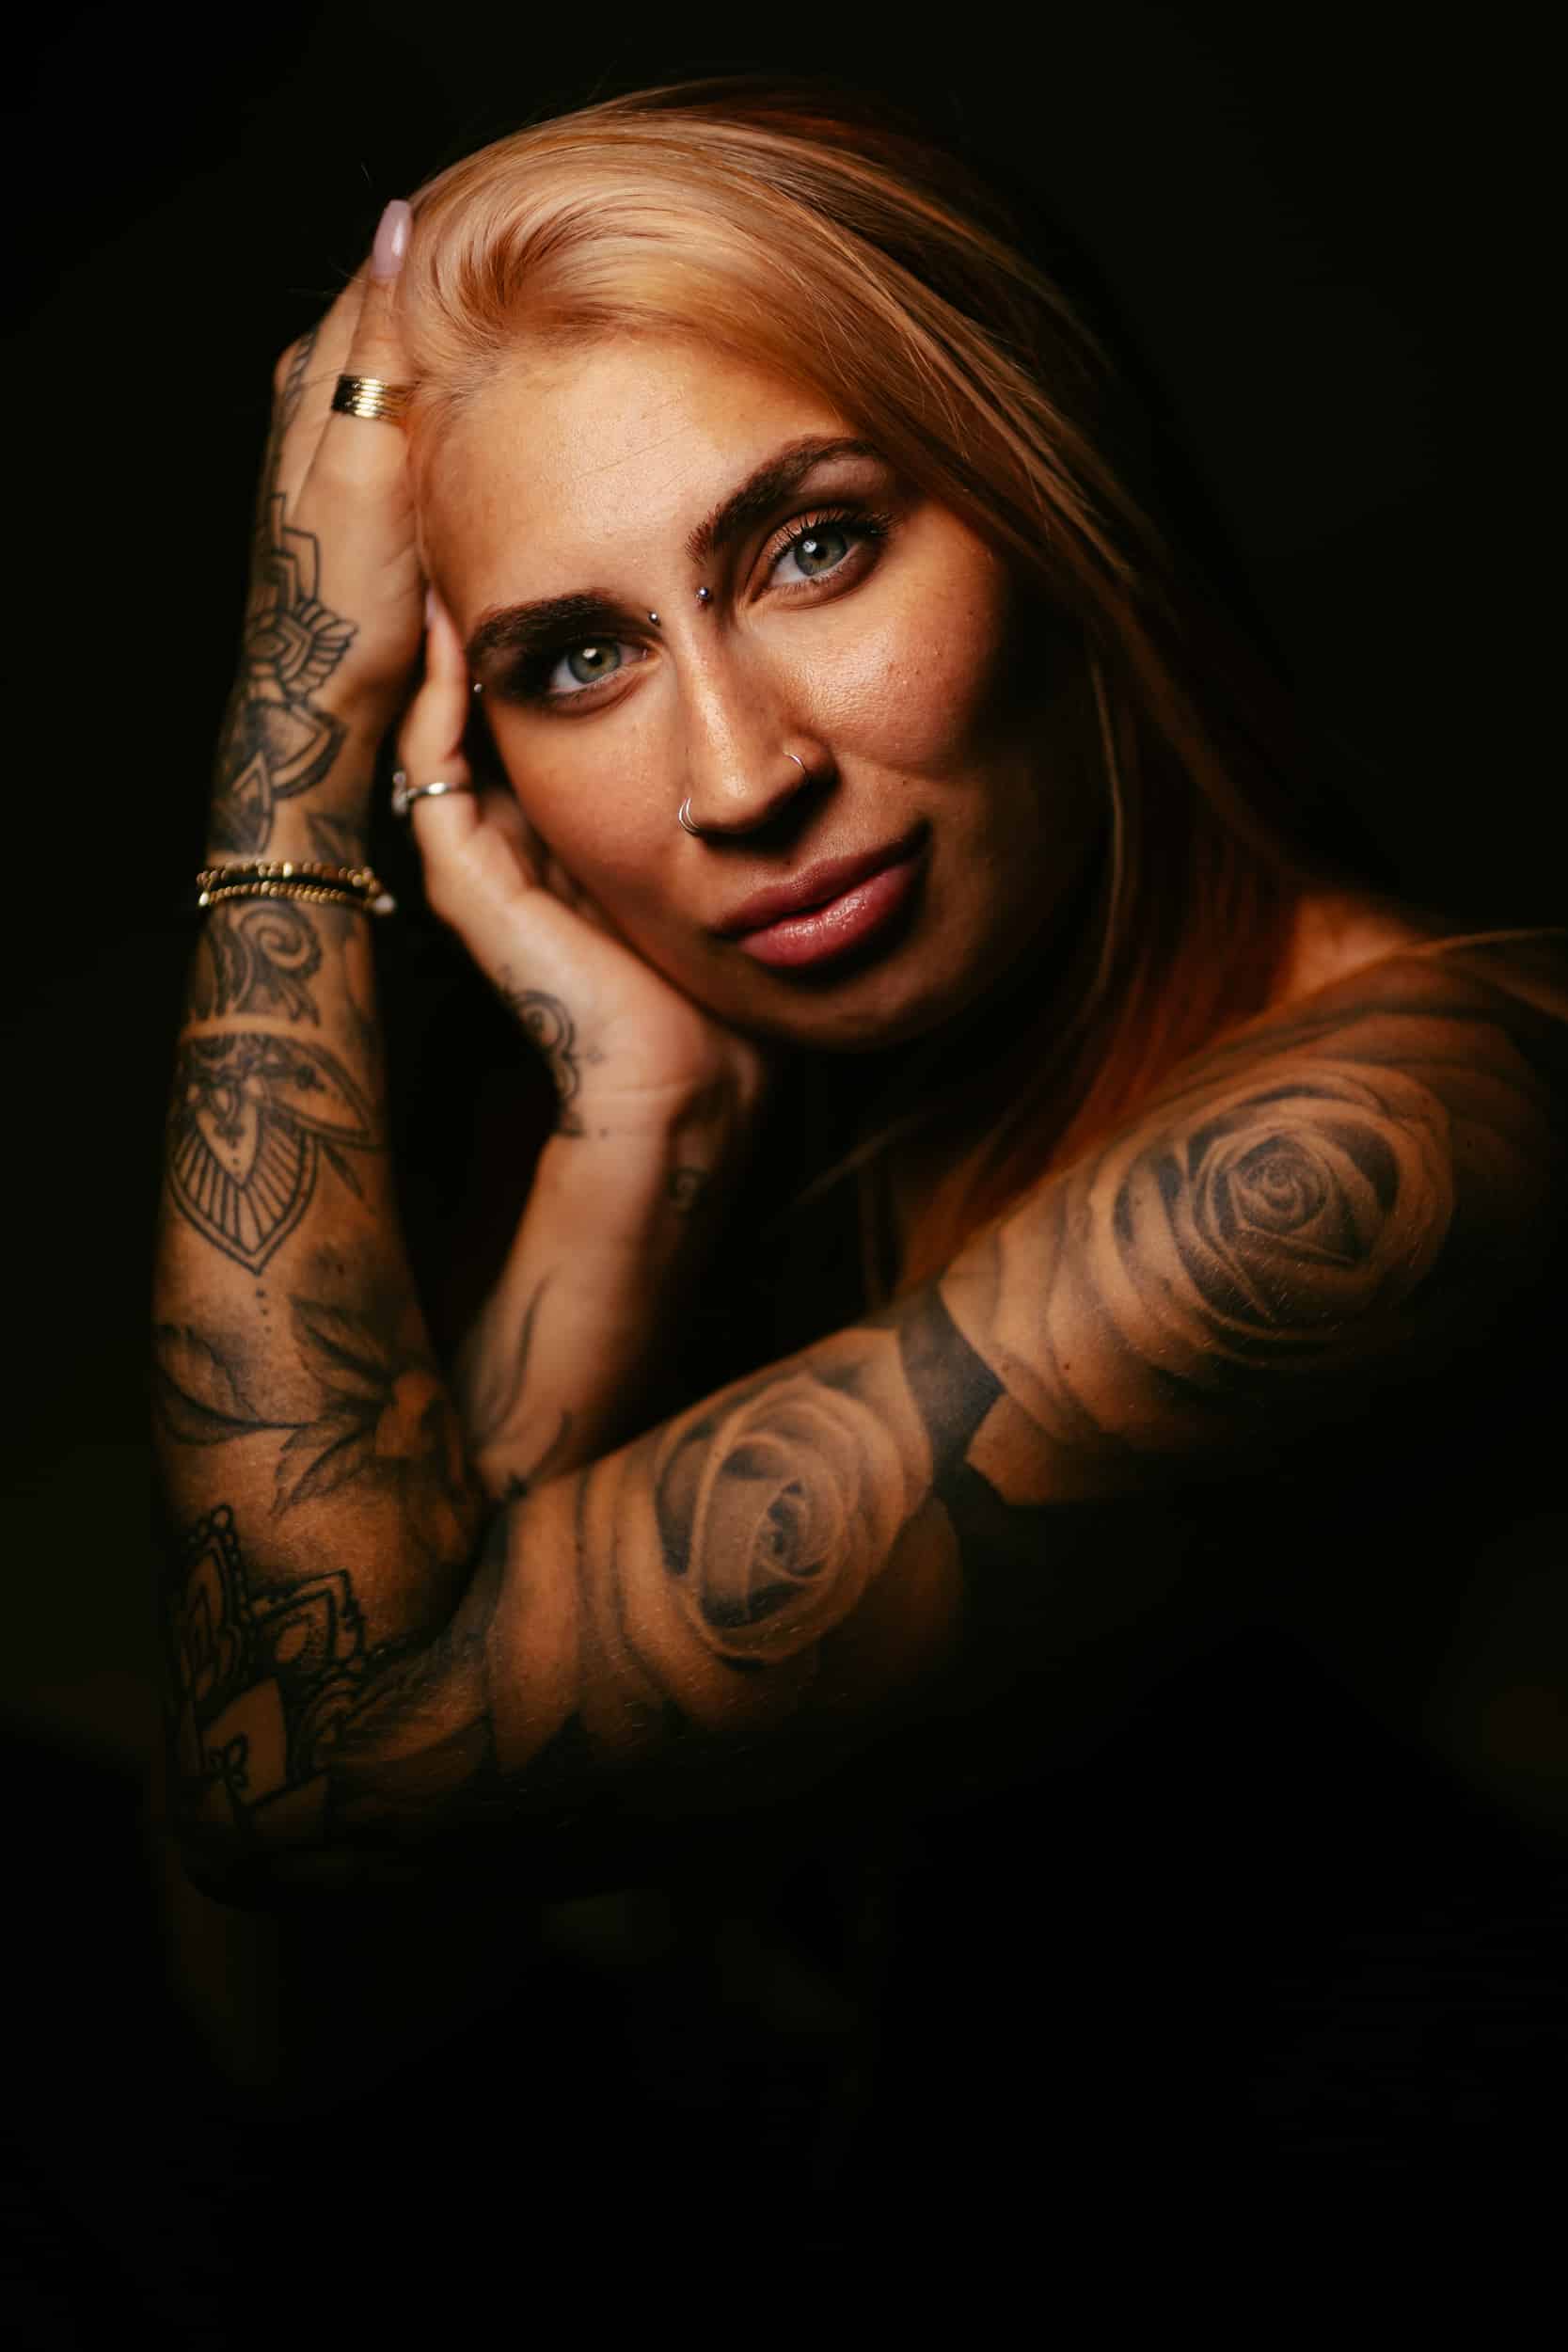 A professional portrait photographer capturing a woman with tattoos during a beautiful photo session.